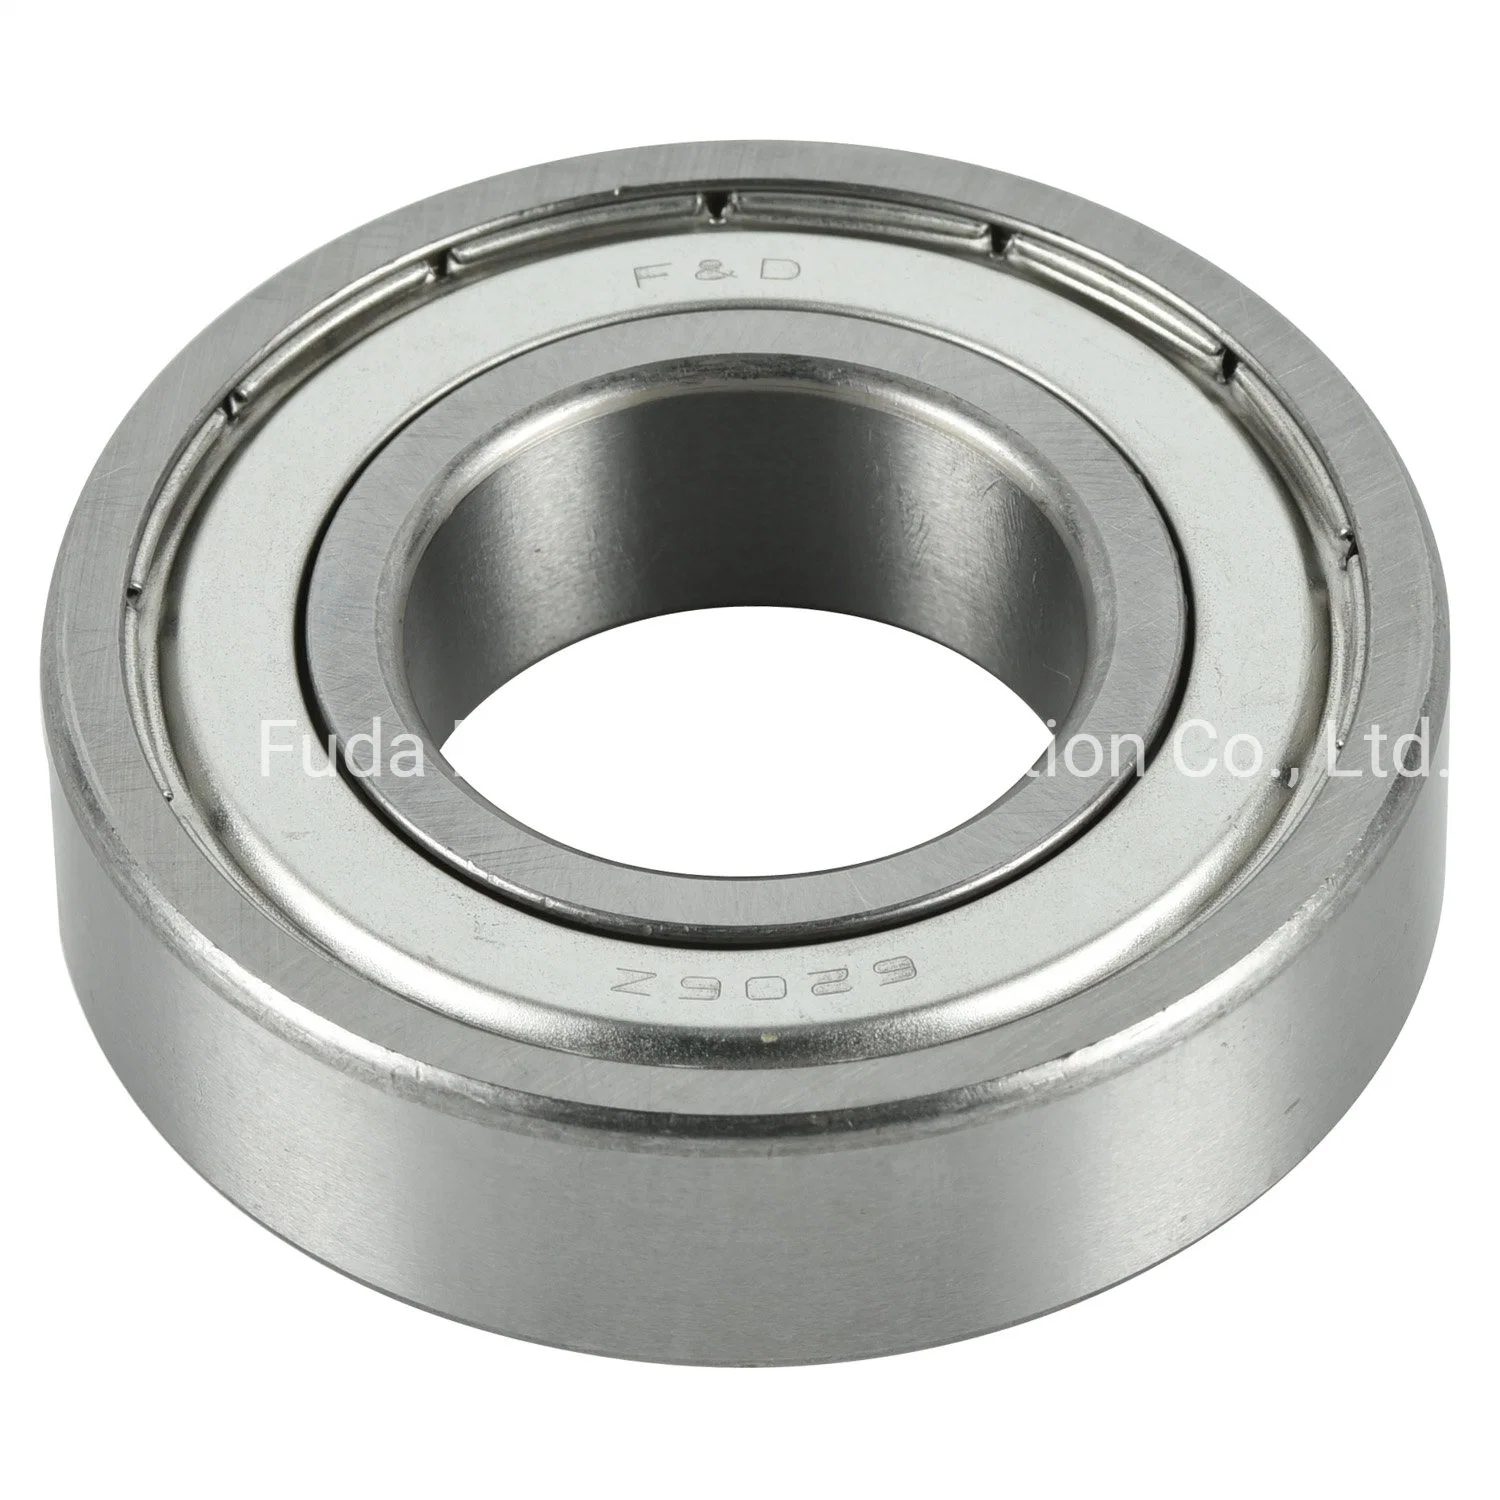 Universal Hardware Parts  ball bearing 6203 6204 6207 6311 for auto parts